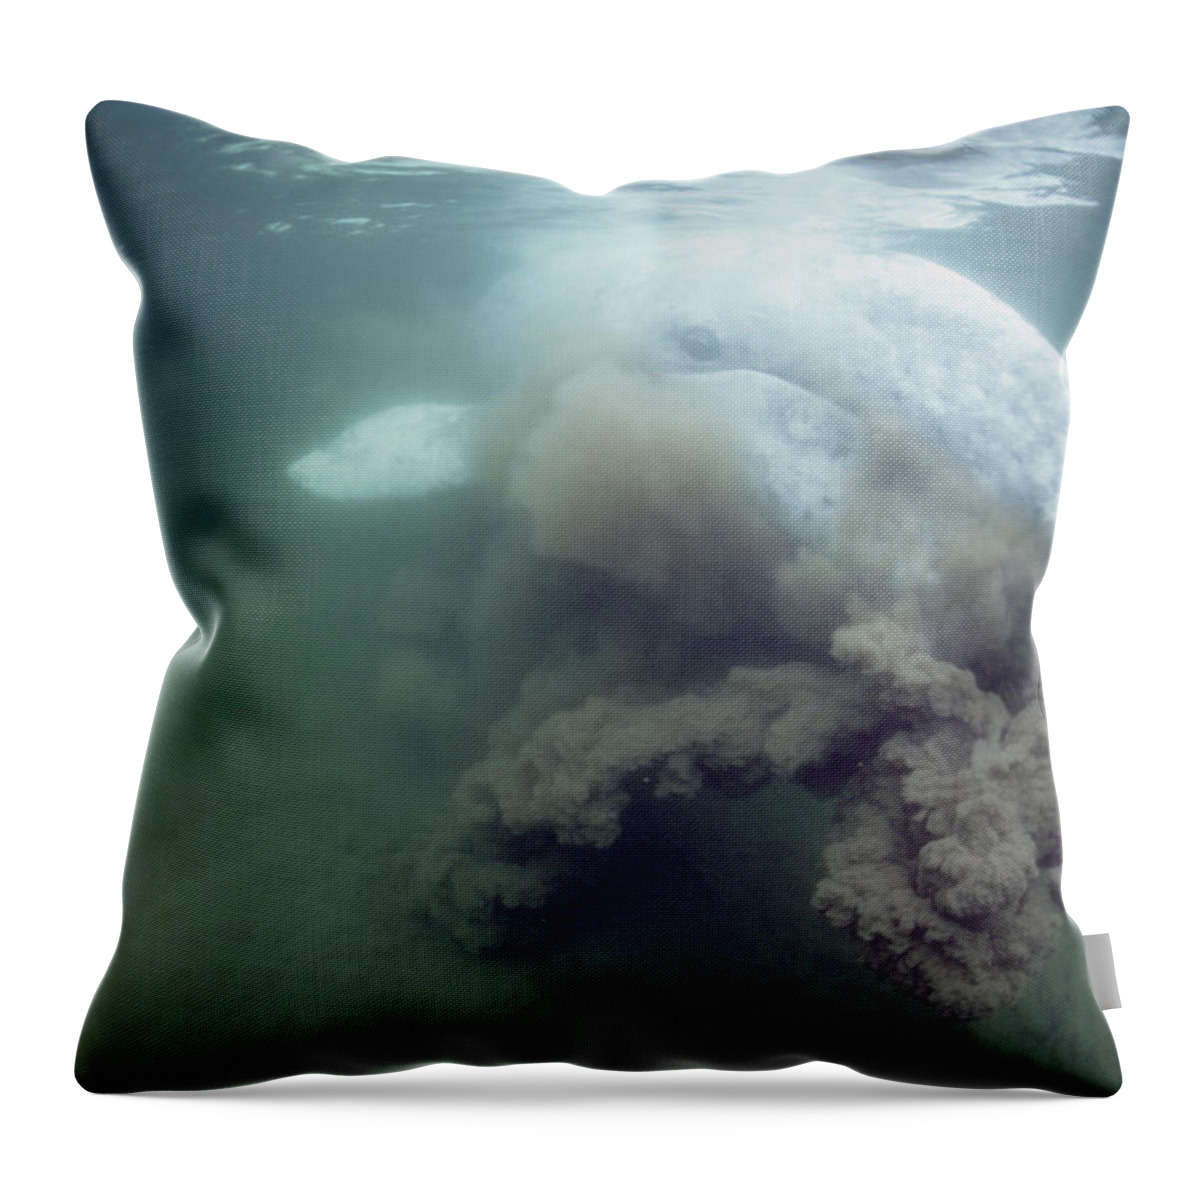 00080417 Throw Pillow featuring the photograph Gray Whale Filter Feeding Tofino by Flip Nicklin